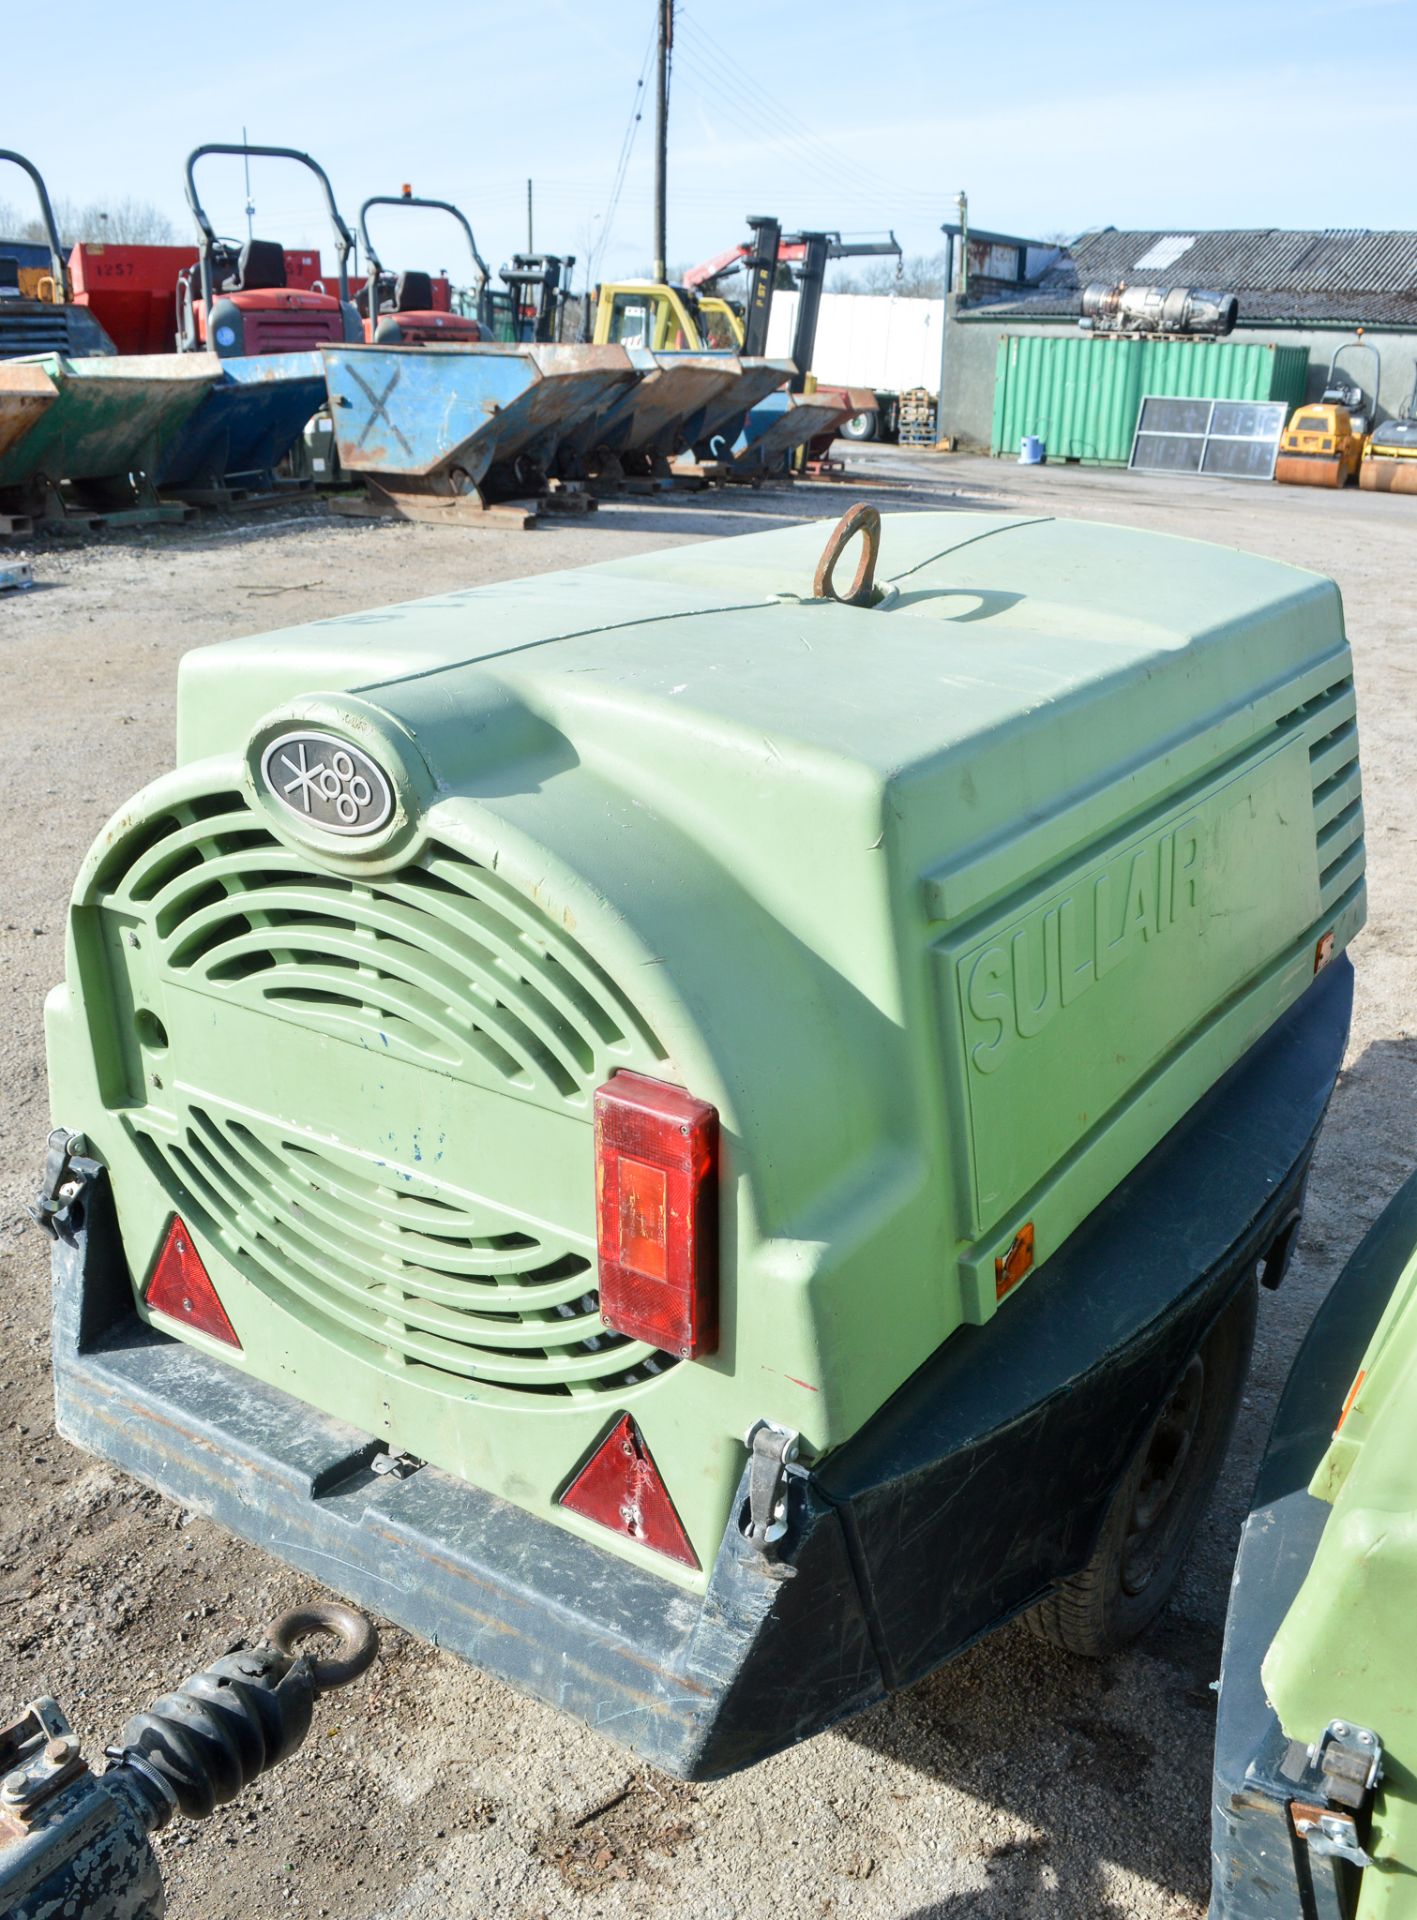 Sullair 48K diesel driven mobile air compressor Year: 2007 S/N: 48899 Recorded Hours: 967 - Image 2 of 3